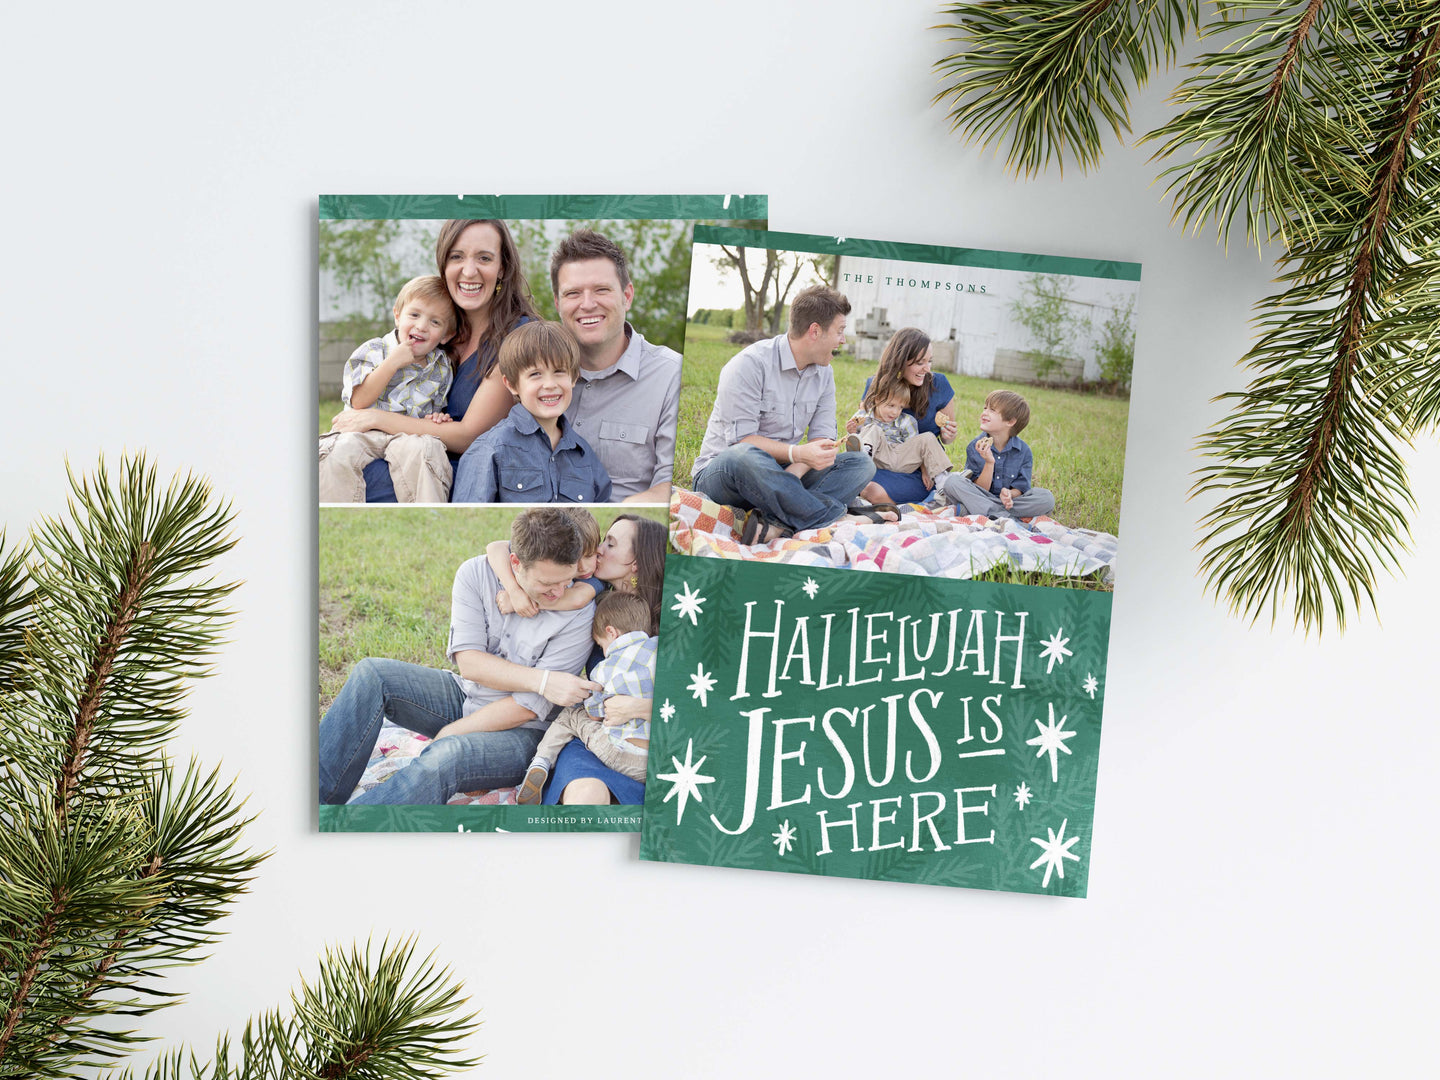 A photo of a Christmas card showing the front and back of the card laying on a white surface. Around the two sides of the card are pine needles. The front of the card features a photo on the top and on the bottom is in green with words in white “Hallelujah Jesus is Here” with white stars around it. The back of the card features two photos. 